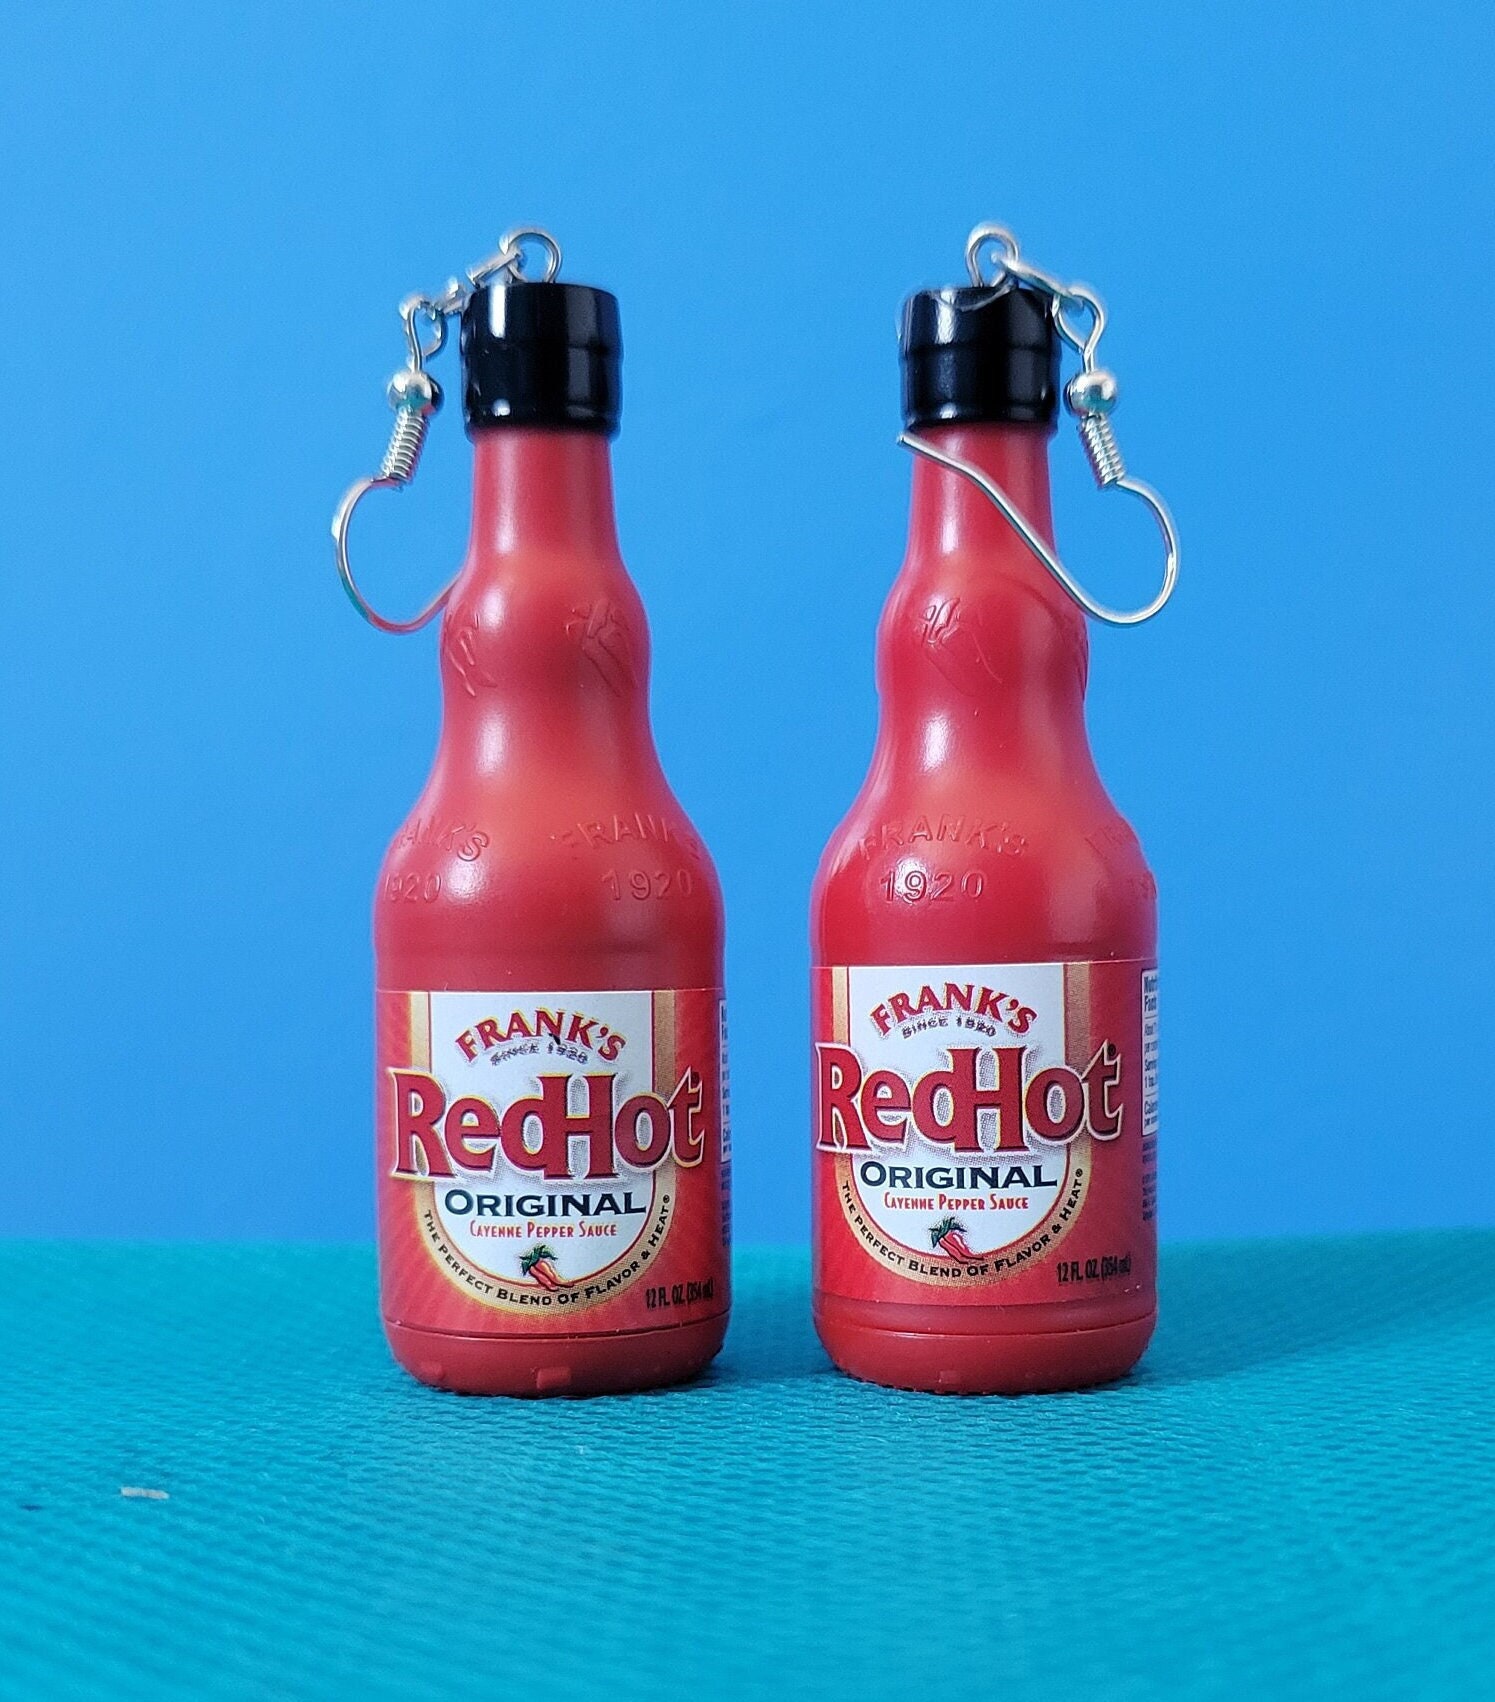 Mini Tabasco Hot Sauce Keychain - Includes 3 Mini Hot Sauce Bottles (.35oz)  With Travel Hot Sauce Key Chain and Refill Funnel - Red Tabasco Hot Sauce